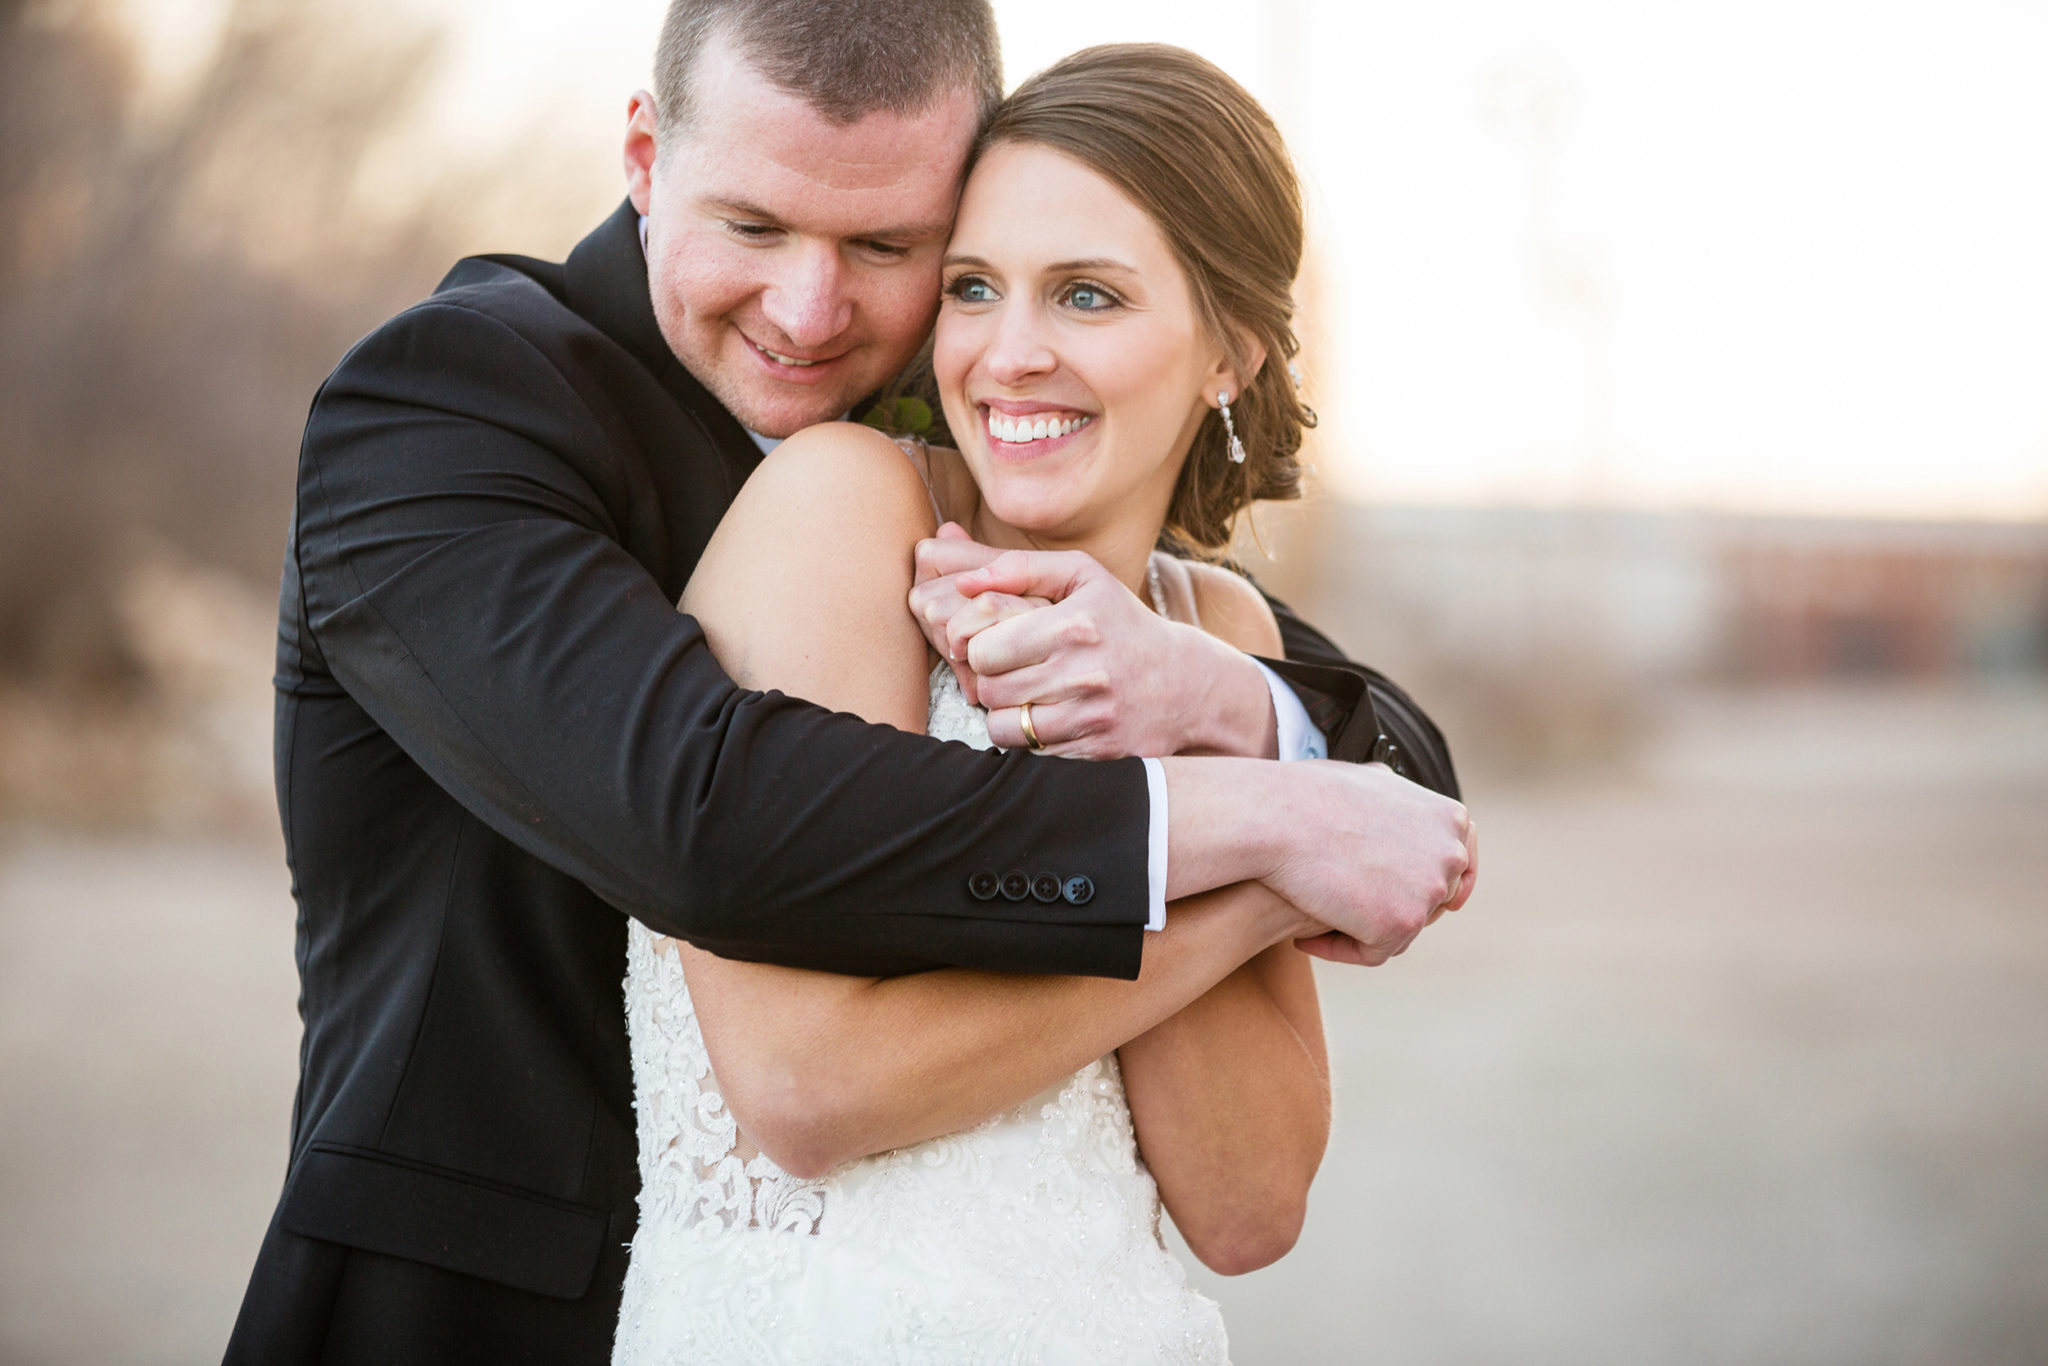 Whitney and Zach’s Peoria, IL wedding was no different. 